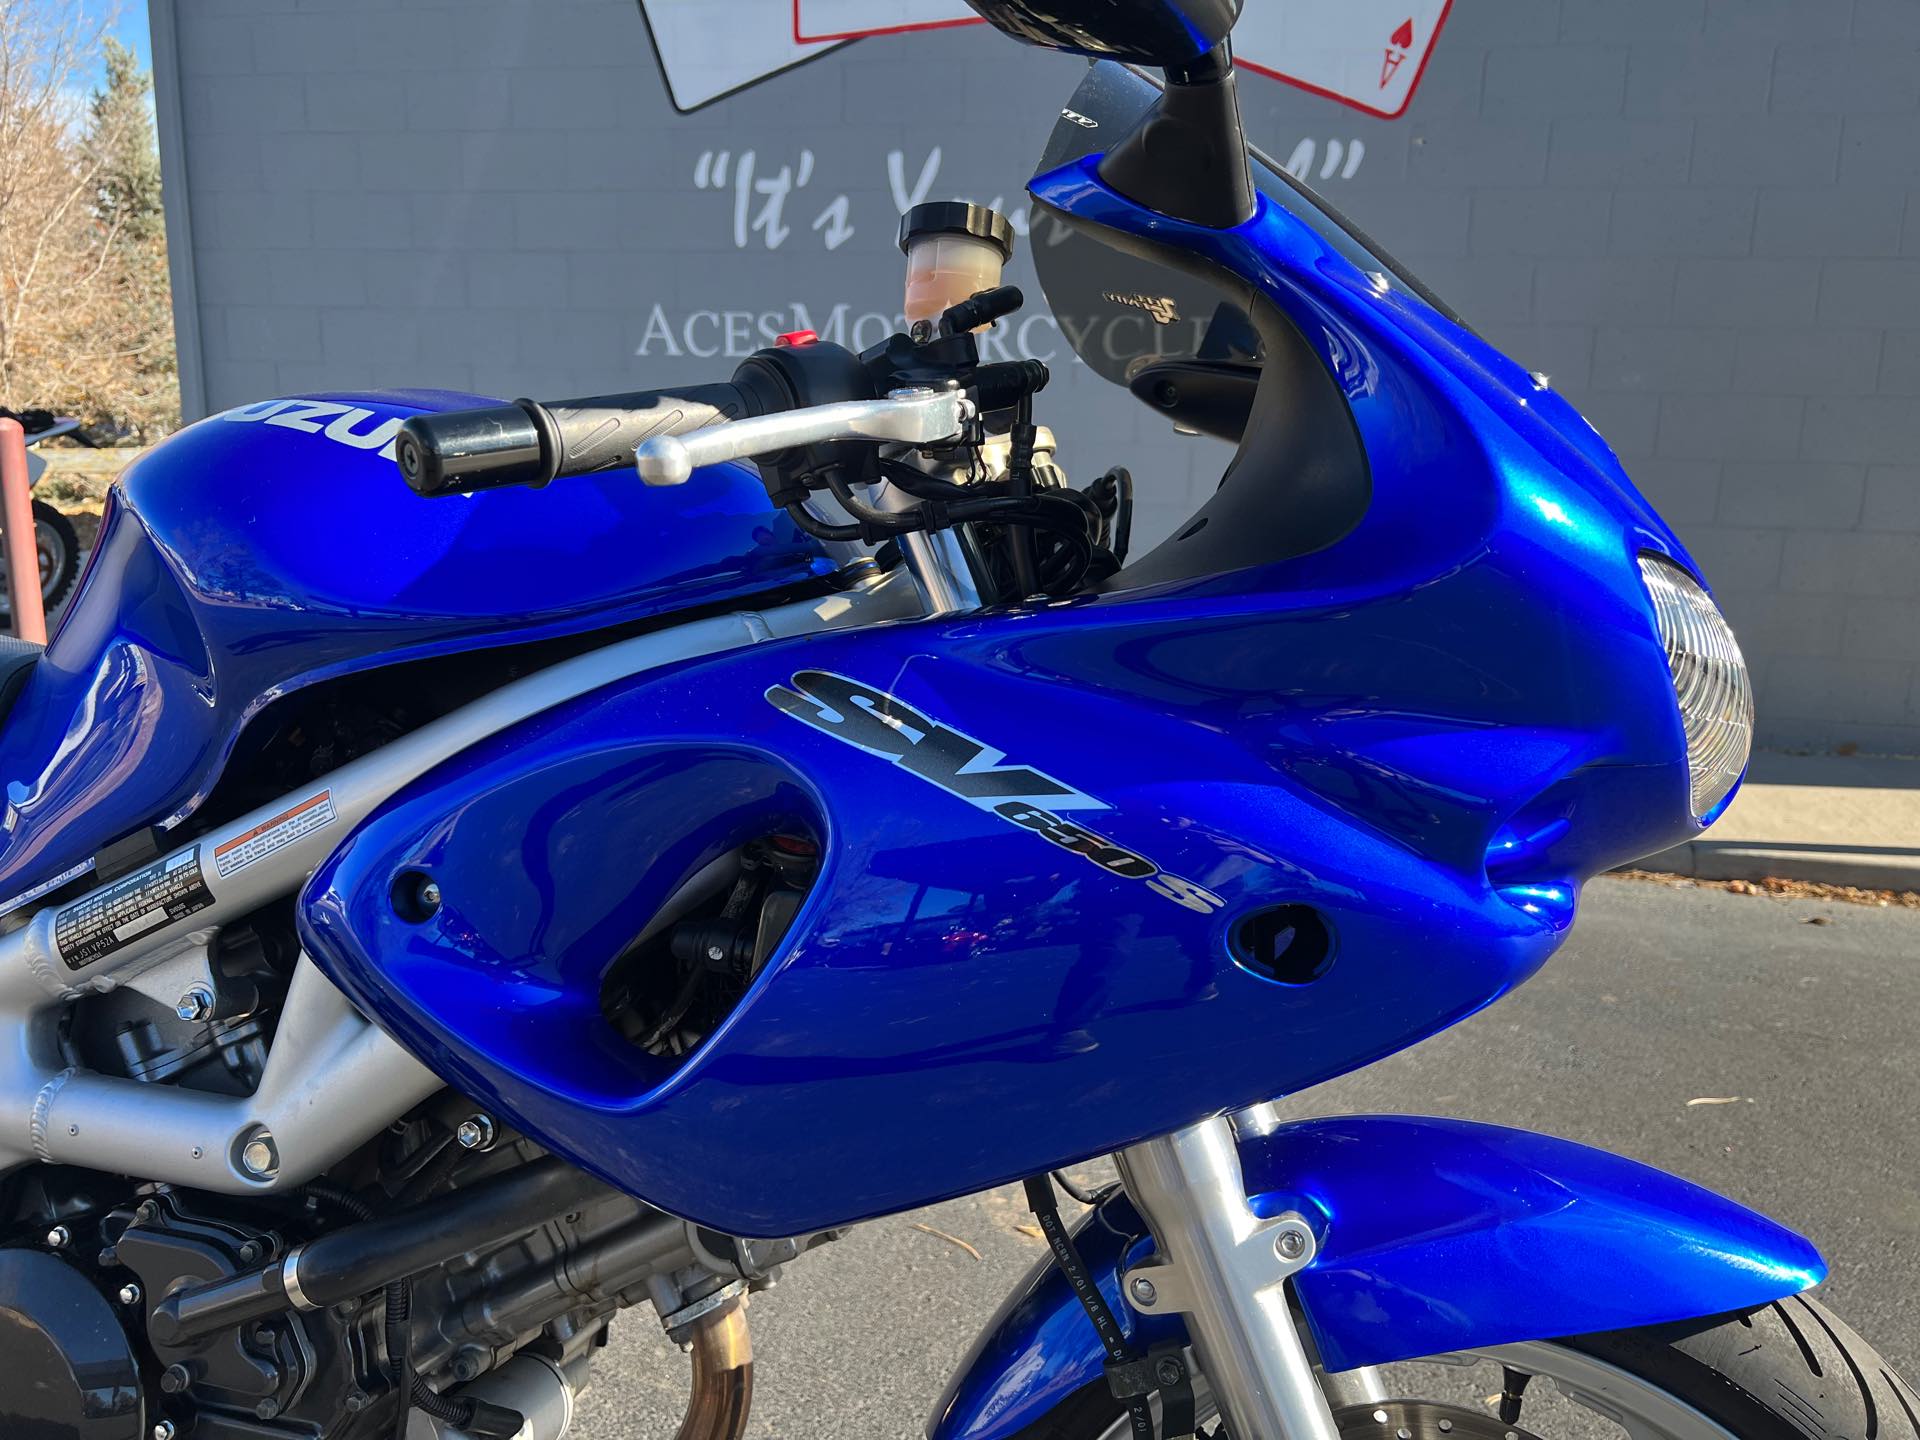 2001 SUZUKI SV650SK1 at Aces Motorcycles - Fort Collins